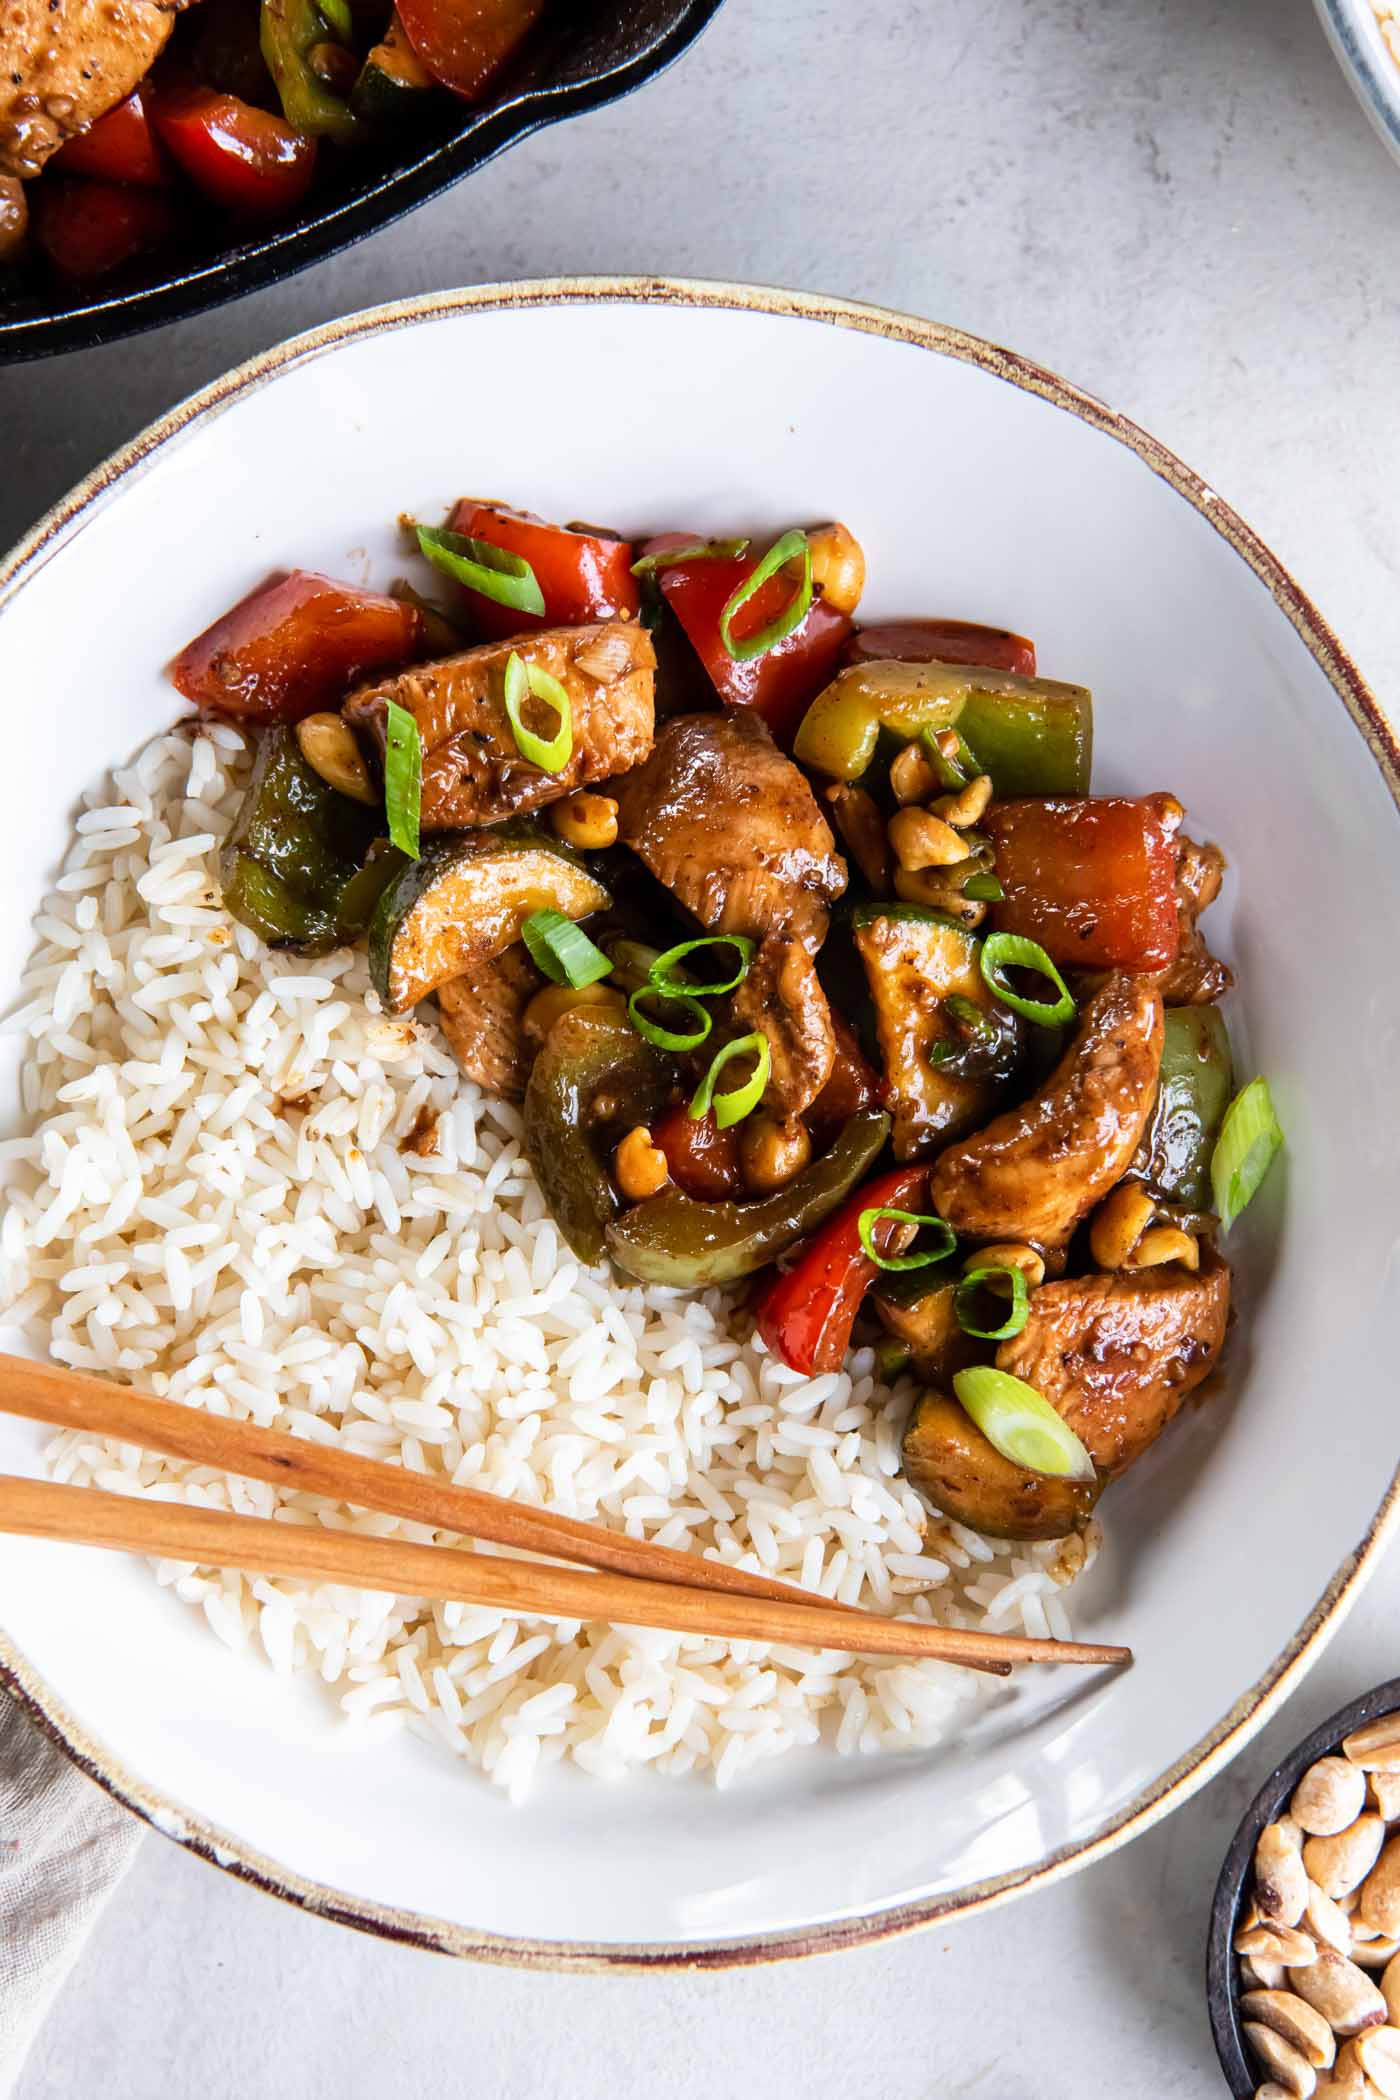 Kung pao chicken served with white rice and chopsticks.